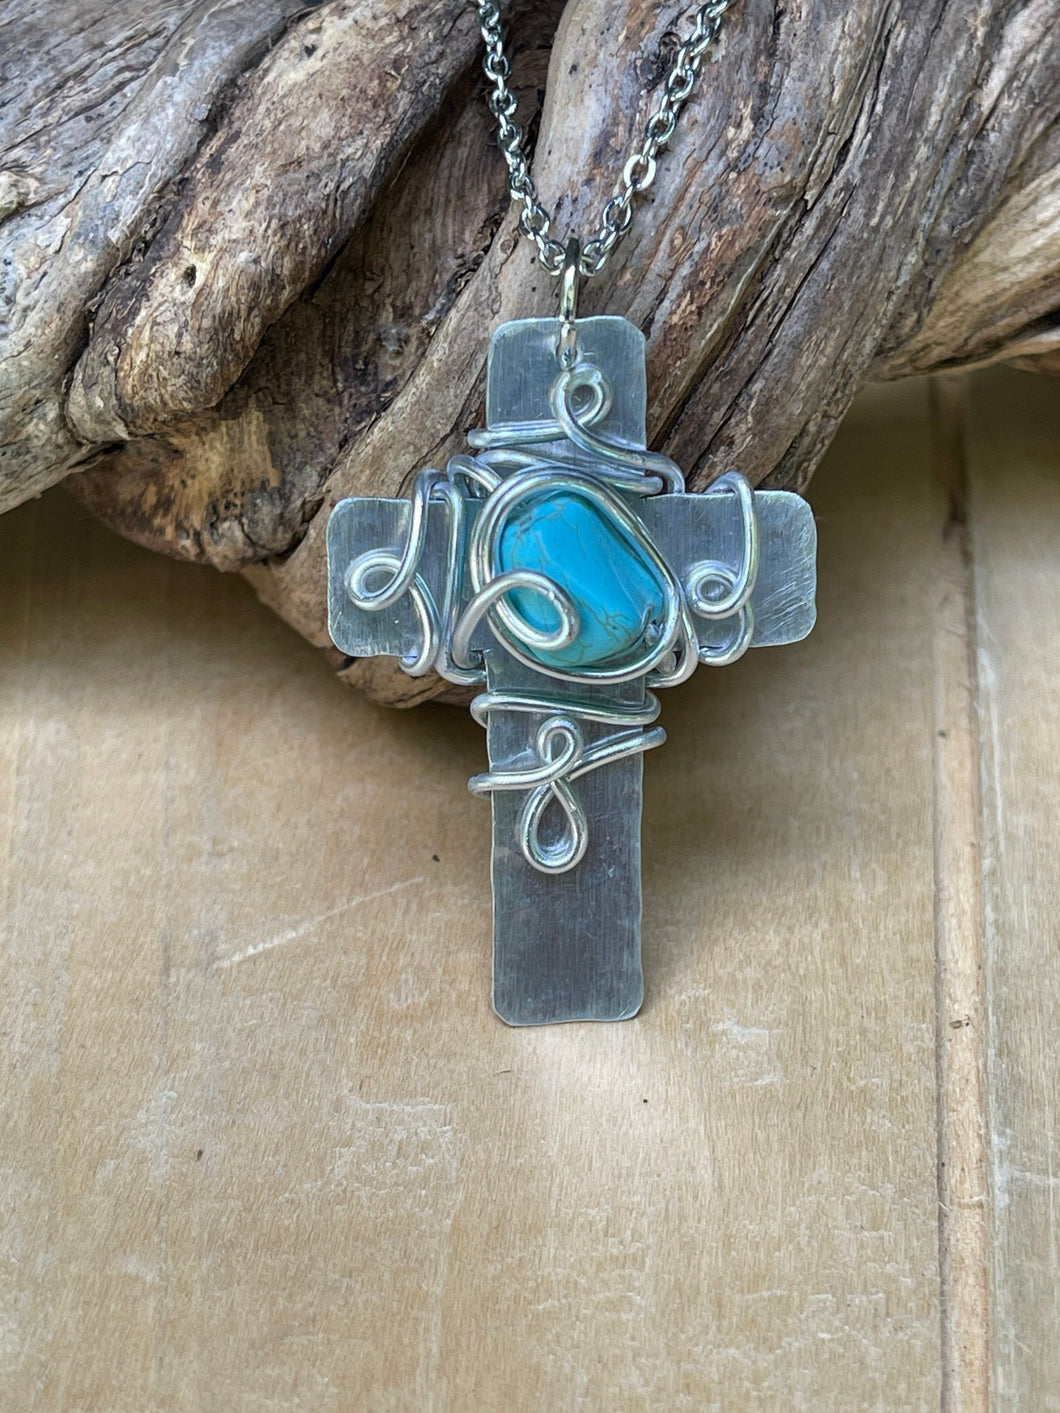 Silver Cross Necklace/ Christian Gift/Turquoise Cross Necklace/ Beaded Cross Necklace/Religious Gift/Small Cross Necklace/Youth Pastor Gift